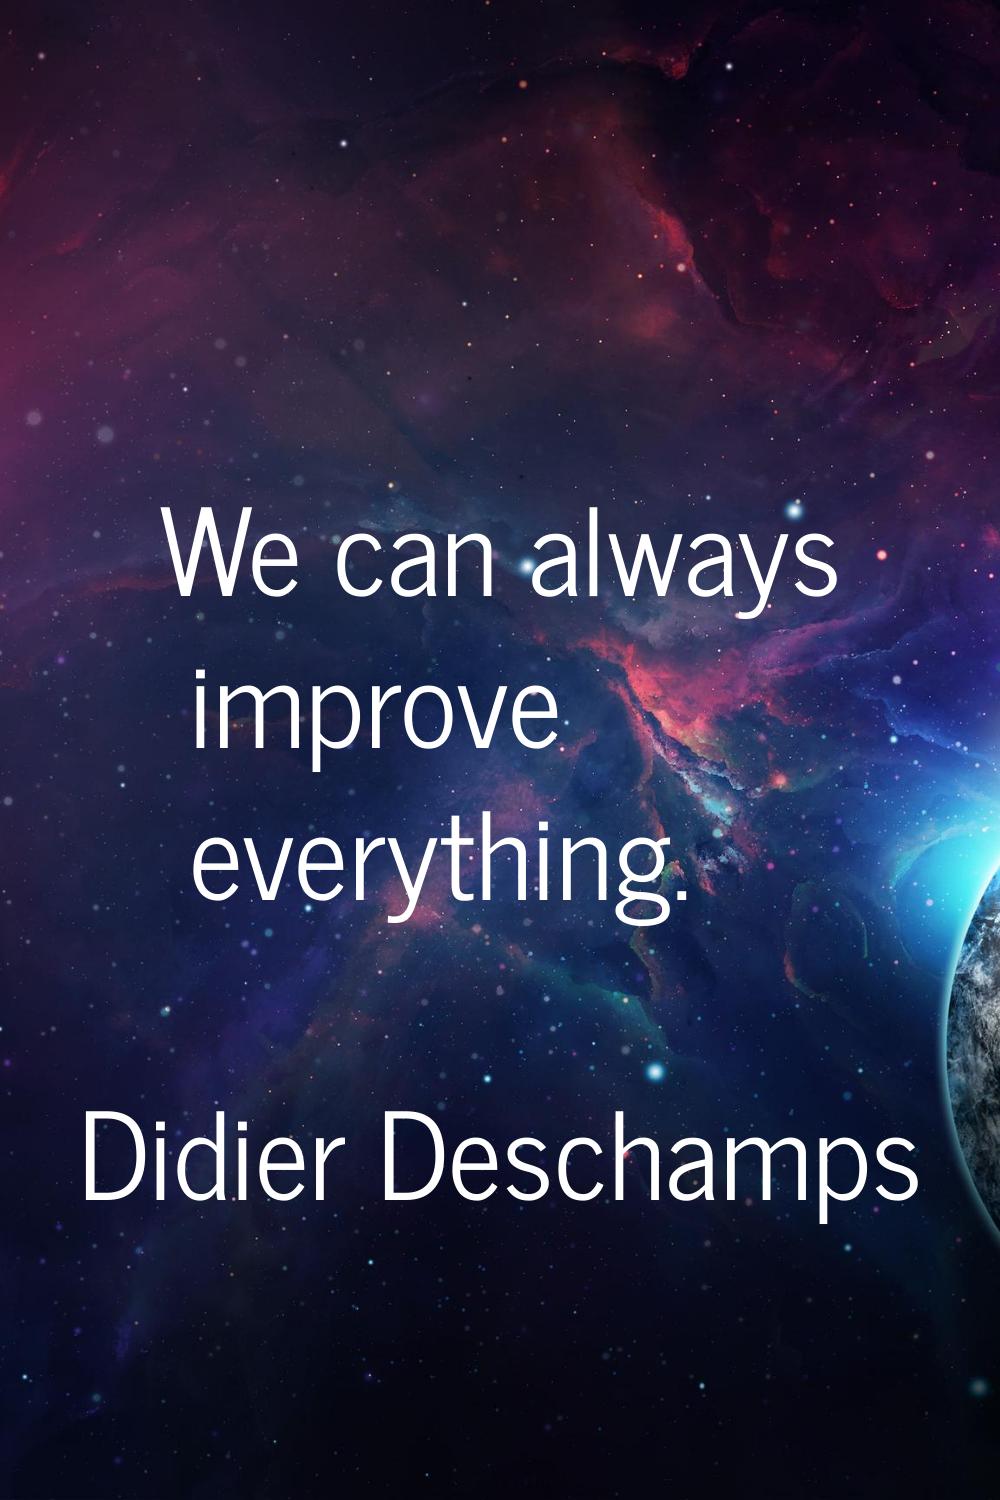 We can always improve everything.